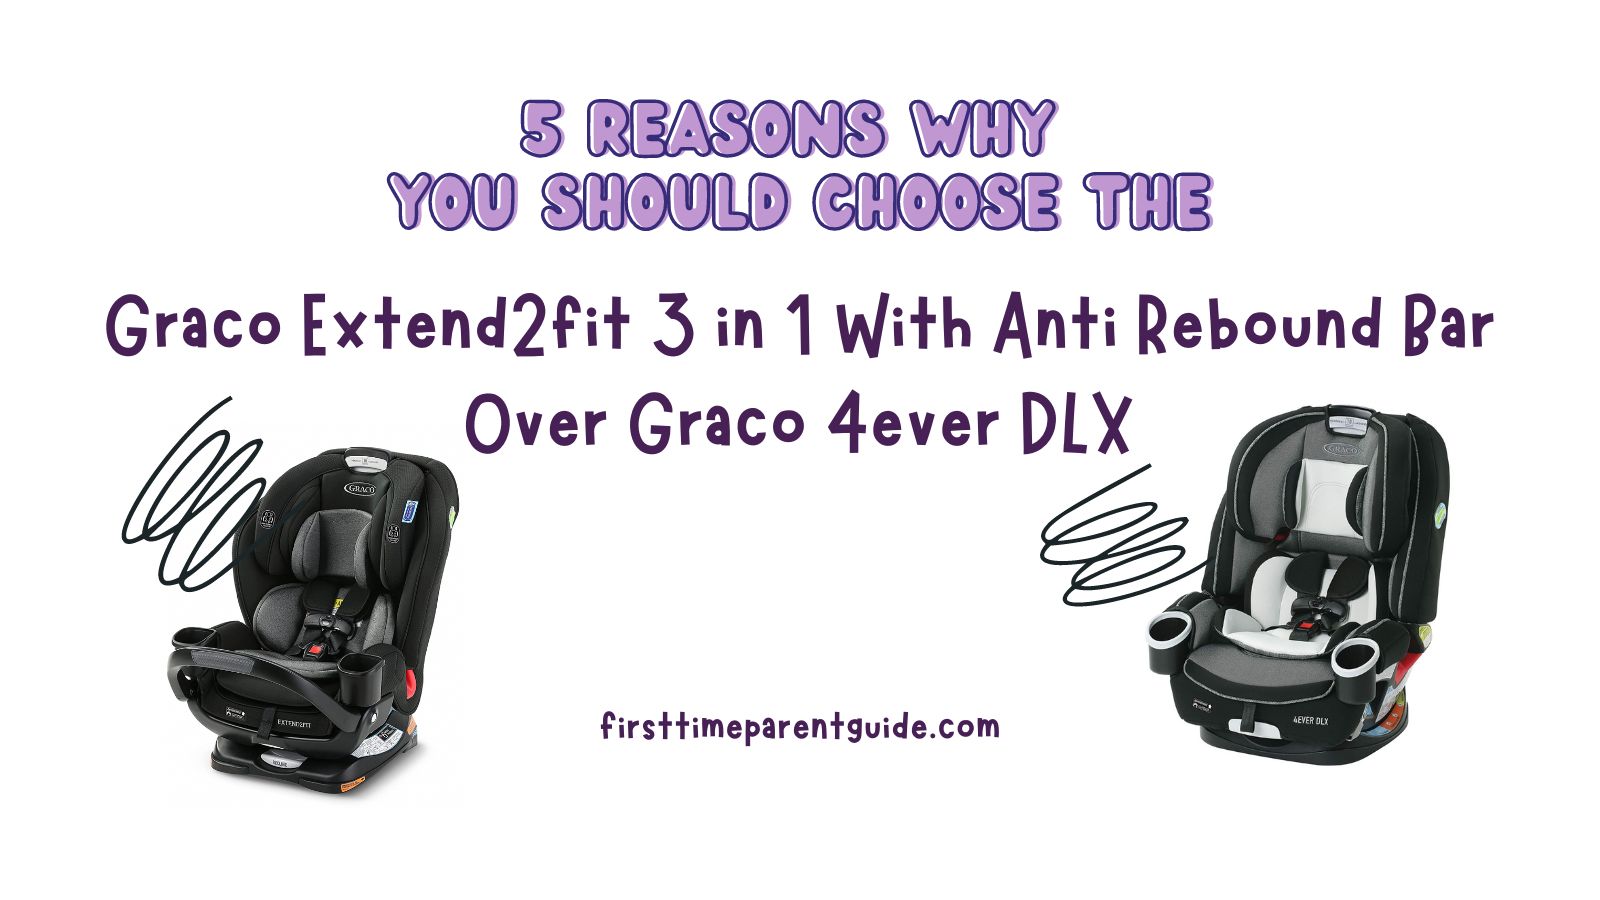 Graco Extend2fit 3 in 1 With Anti Rebound Bar